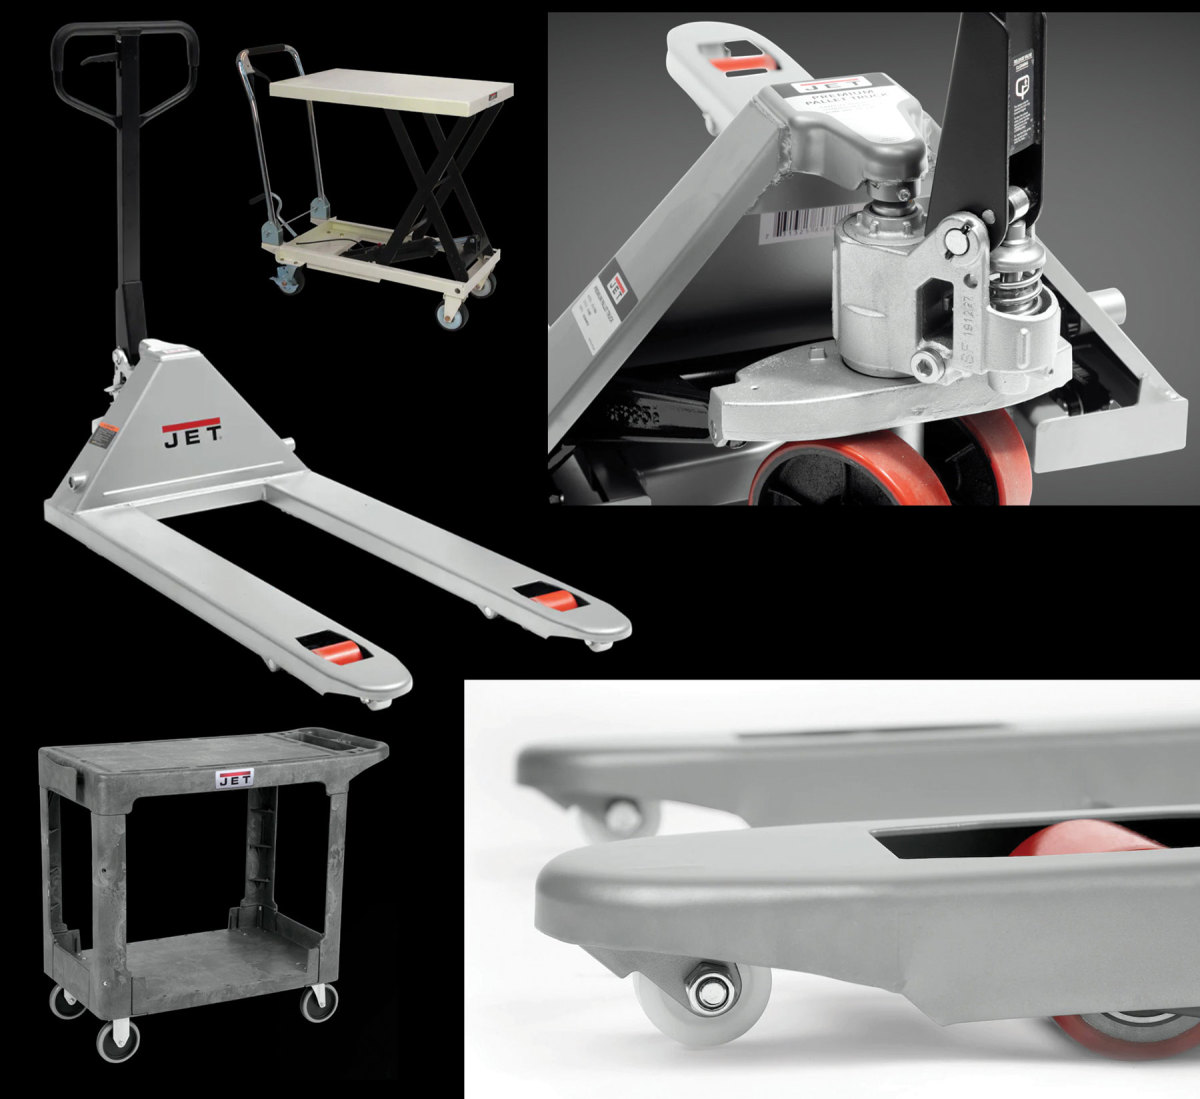 JPW’s JET pallet truck and carts.